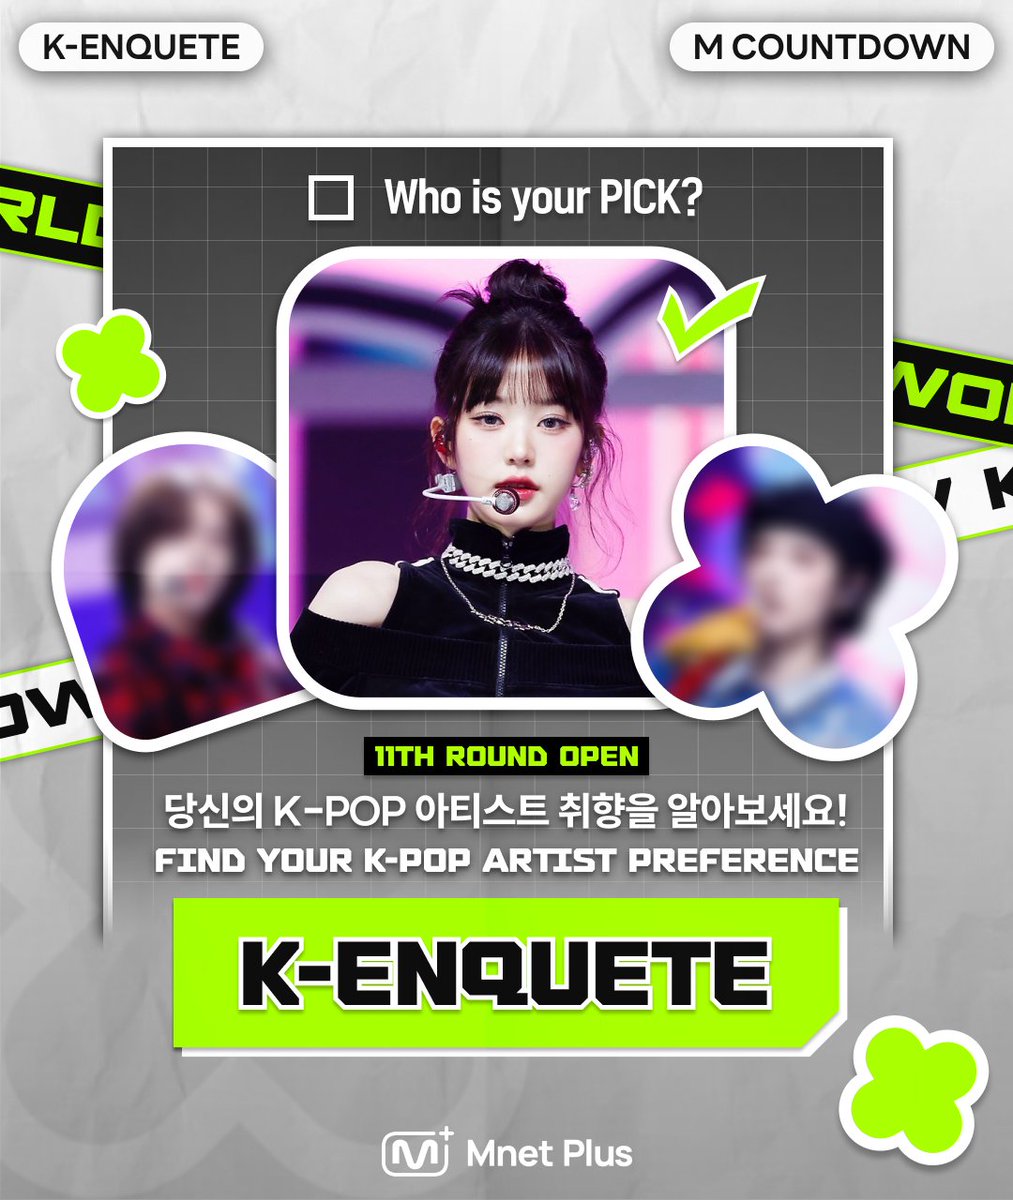 [#MCOUNTDOWN] K-ENQUETE👀 Find your KPOP artist preference! Who support you with a song? #TXT or #RIIZE Who do you want to go with an autumn festival? #CRAVITY or #IVE Choose more! Results out on Mon(11/27) 3PM(KST)✨ 11th round▶️ bit.ly/3u3sYXk #MnetPlus #엠넷플러스